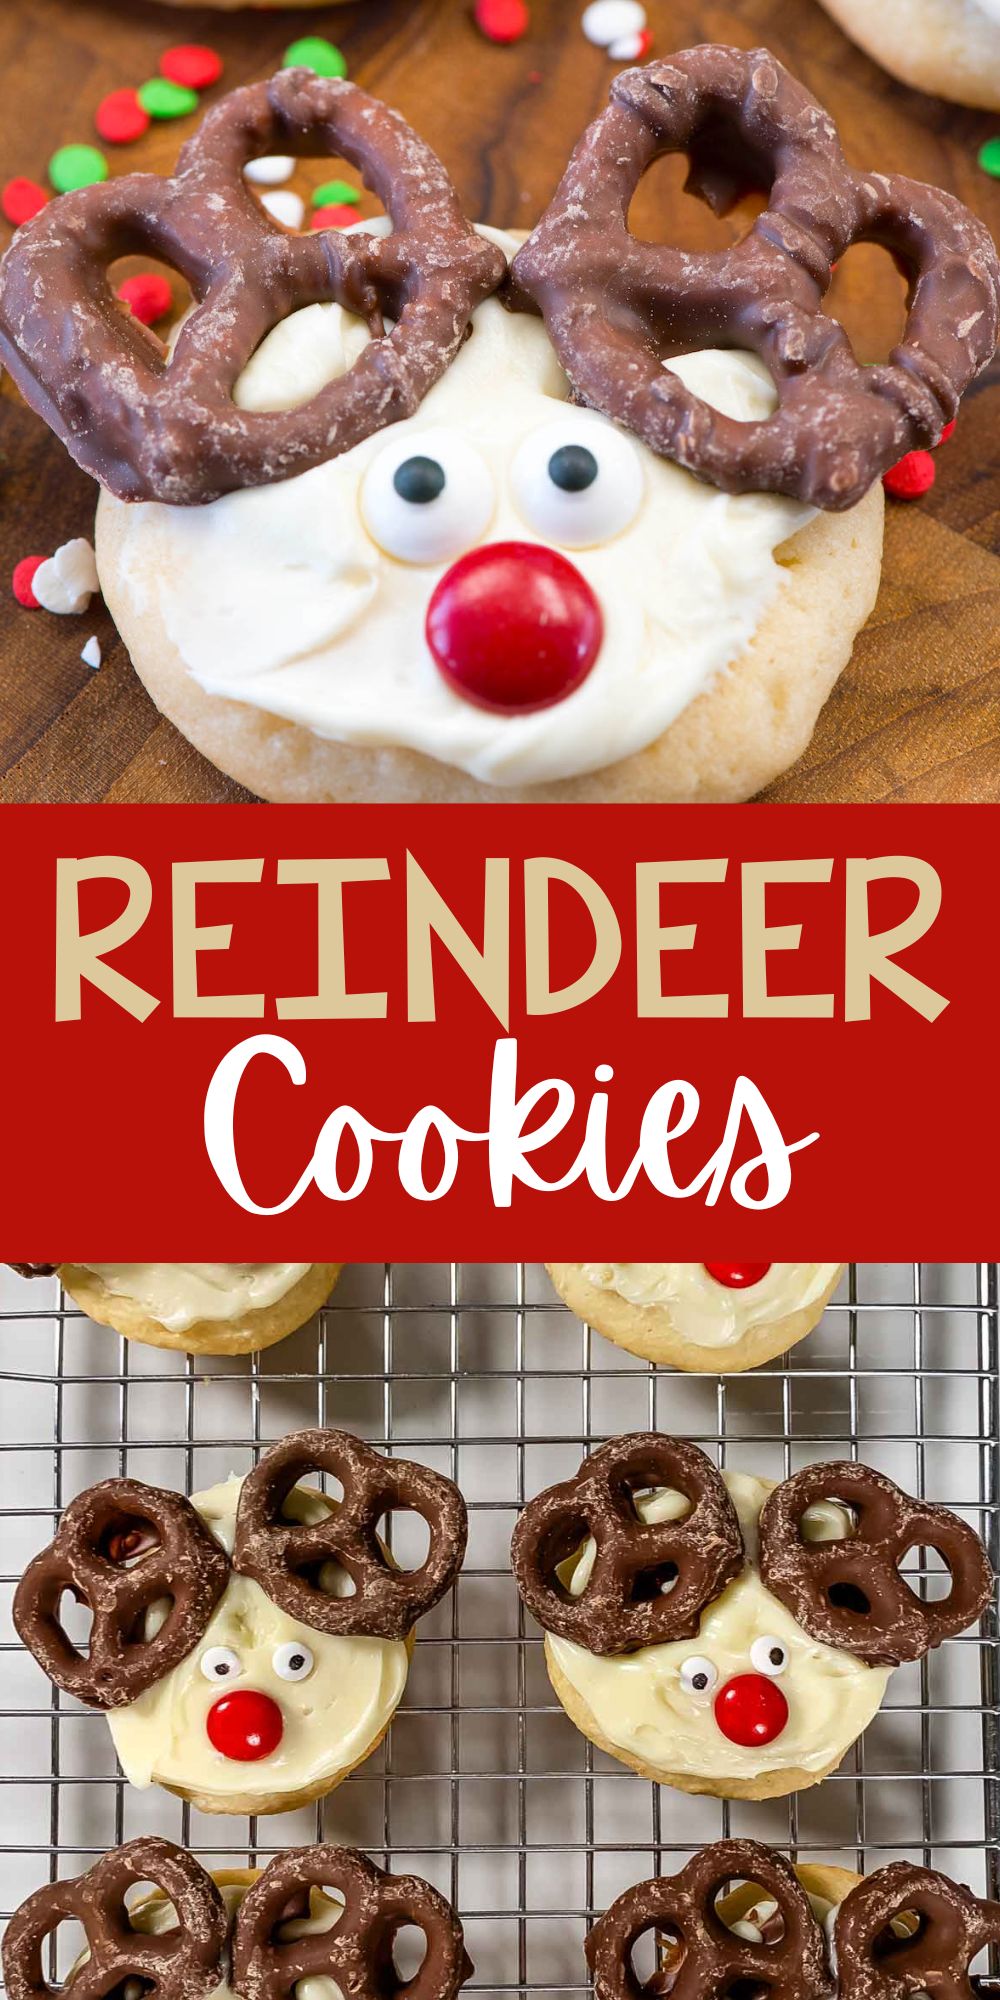 two photos of cookie with white frosting and candy on top to make the cookie look like a reindeers face with words on the image.